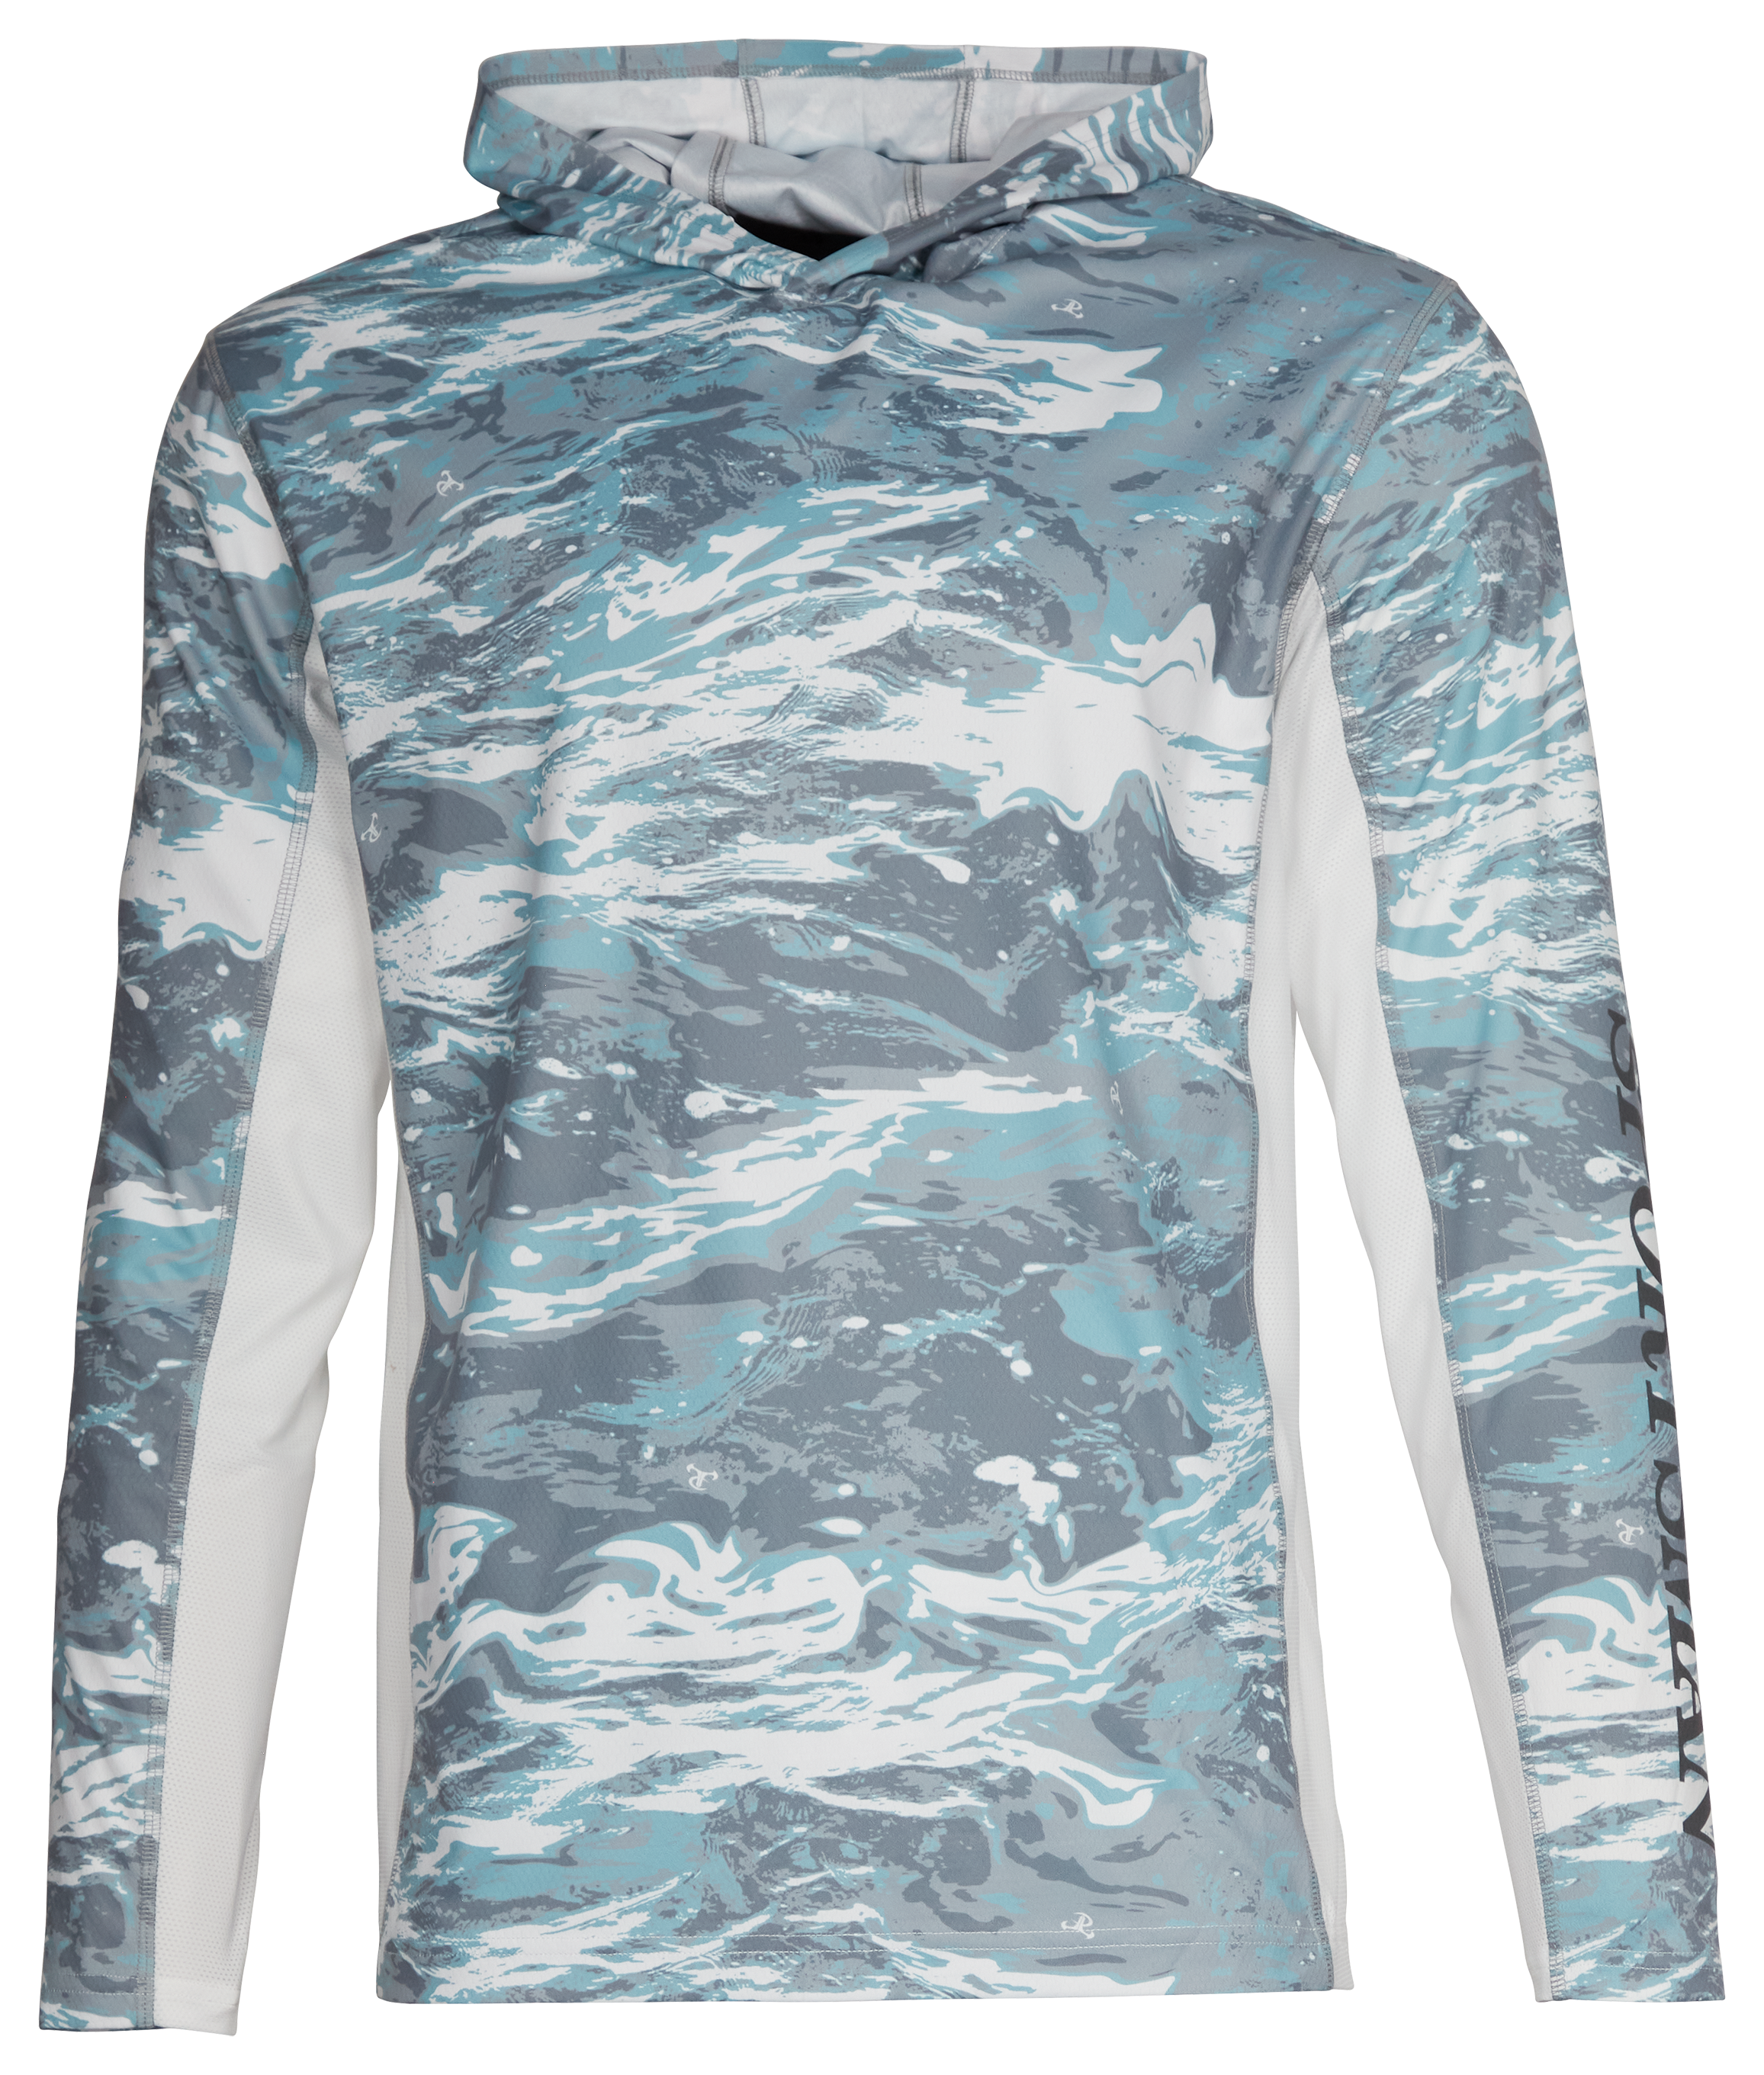 World Wide Sportsman Sublimated Casting Long-Sleeve Hoodie for Men - Sea Moss/Almost Apricot - L